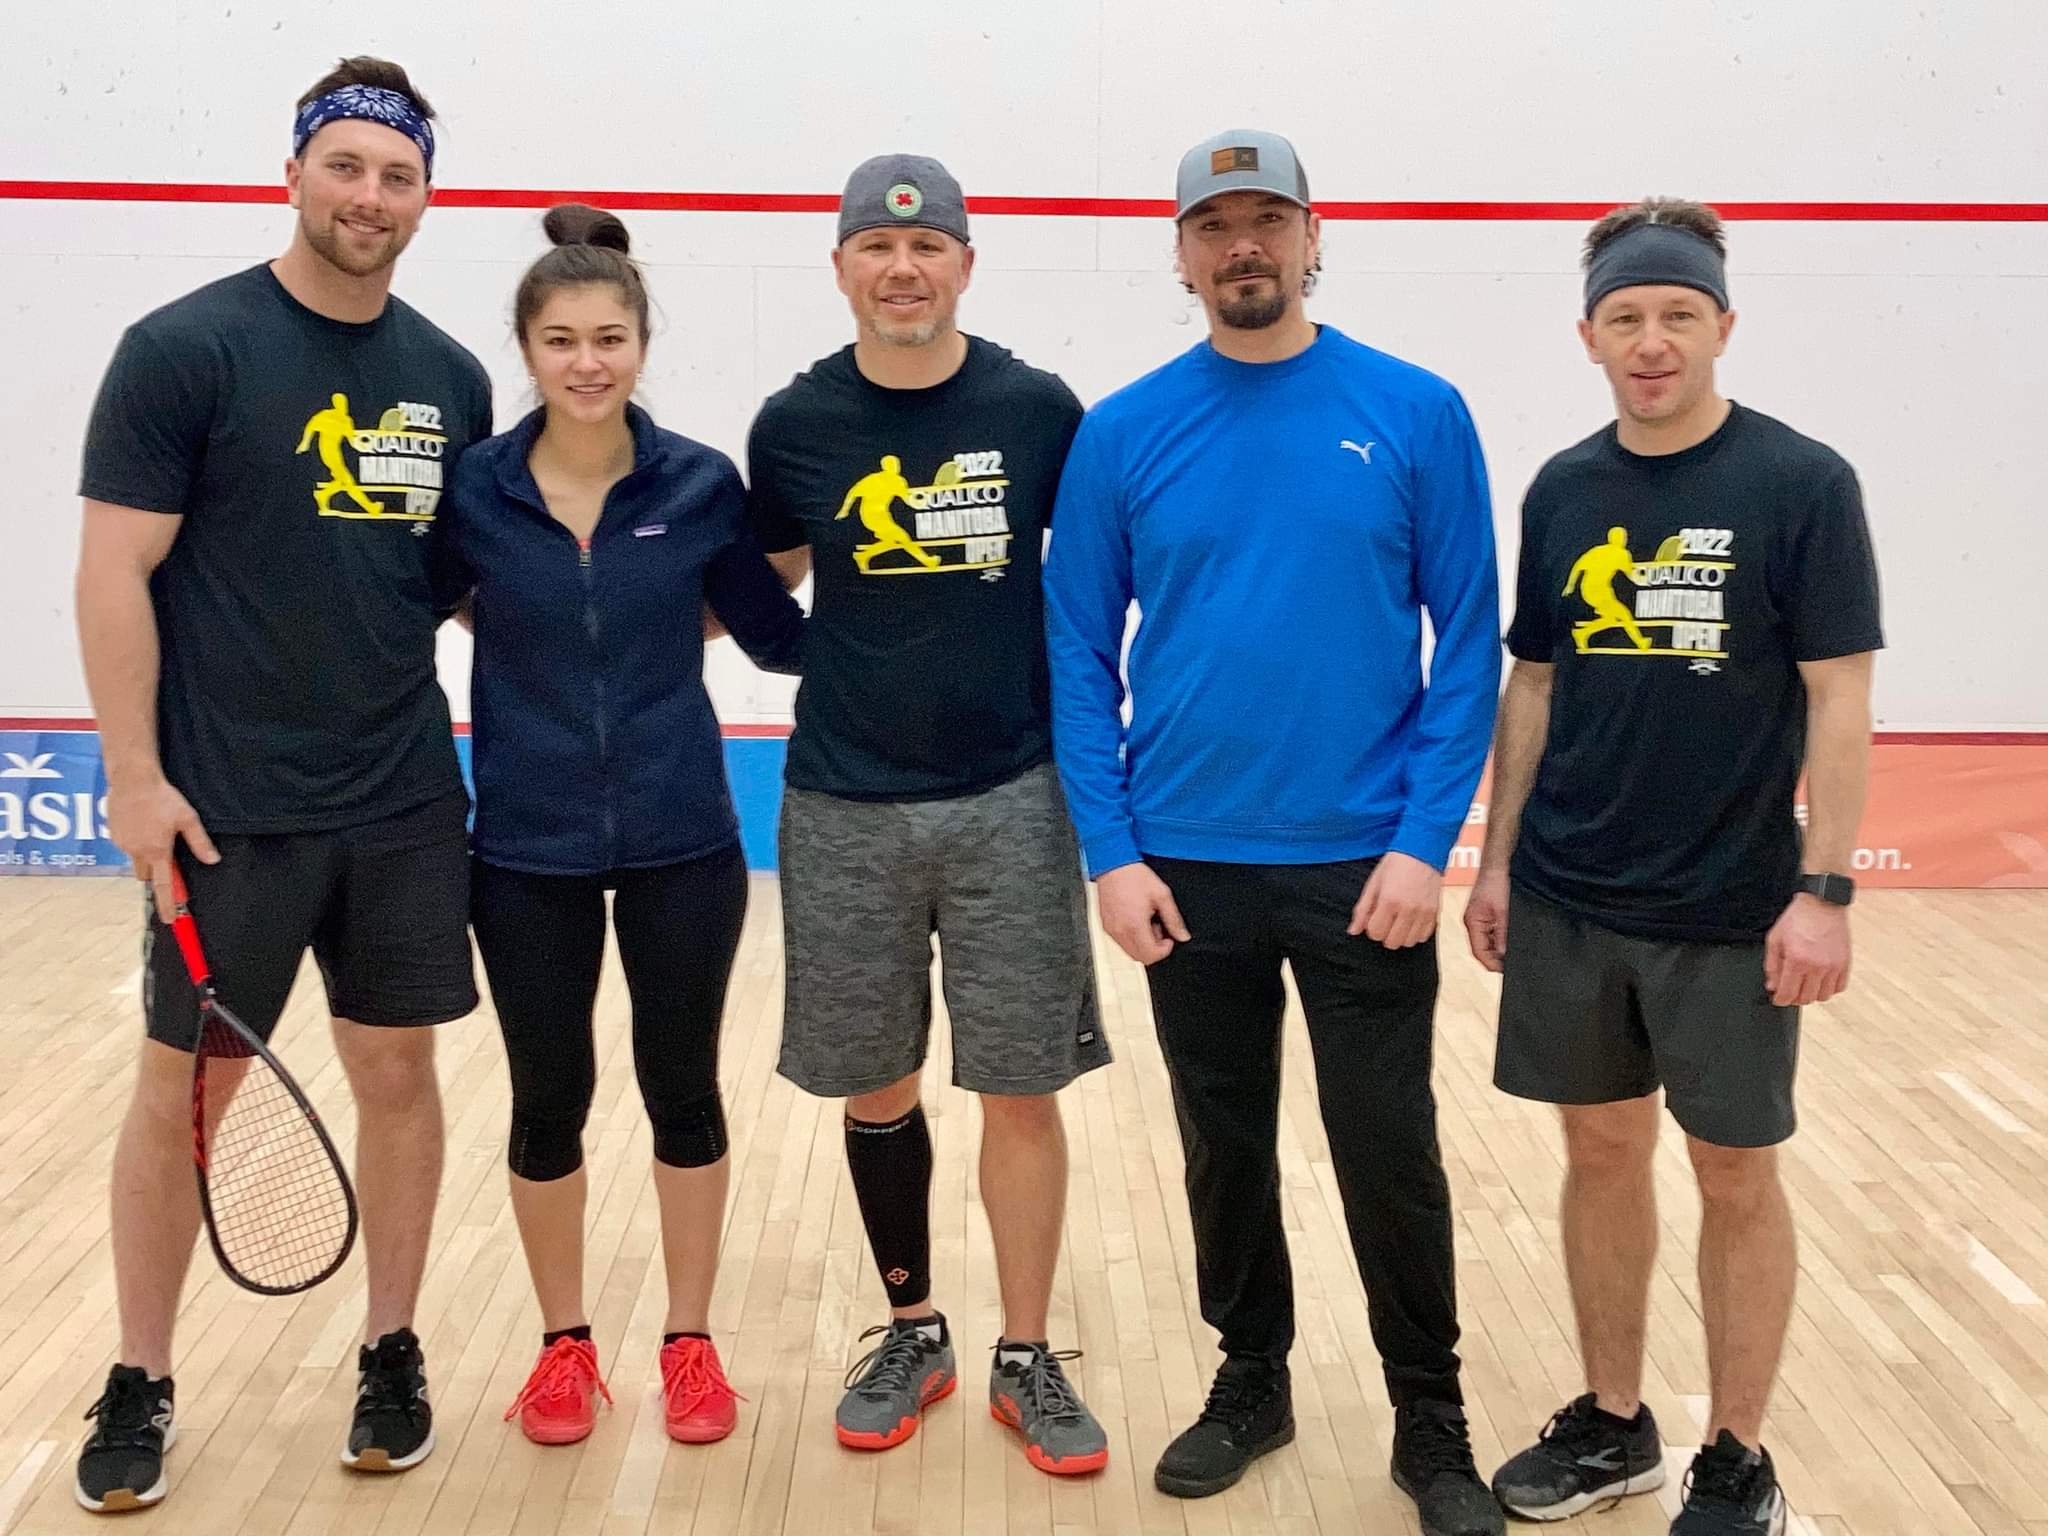 Local players squash competition at tournament